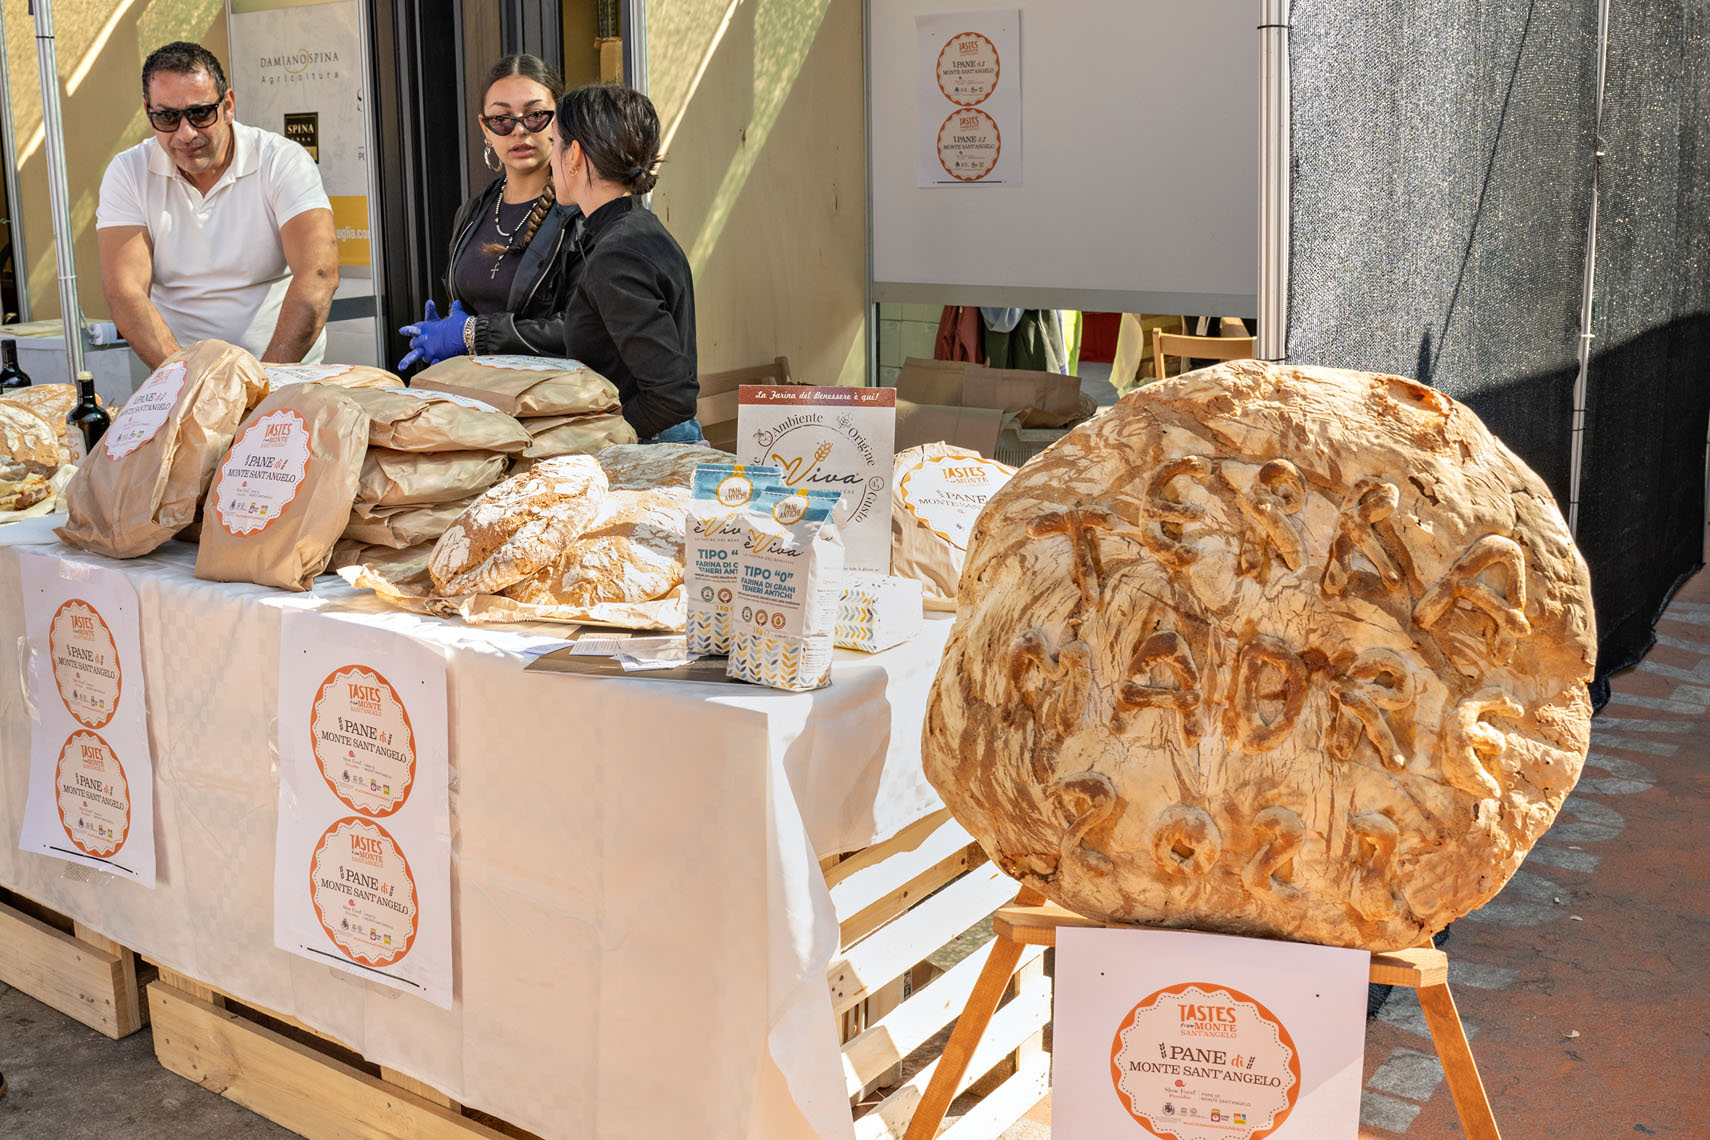 Monte Sant’Angelo Bread is part of the Slow Food Presidium, and  is one of the few soft wheat breads made in Puglia, Italy. The flours used come from soft grain varieties that are linked to the traditional cereal crops found in the region.